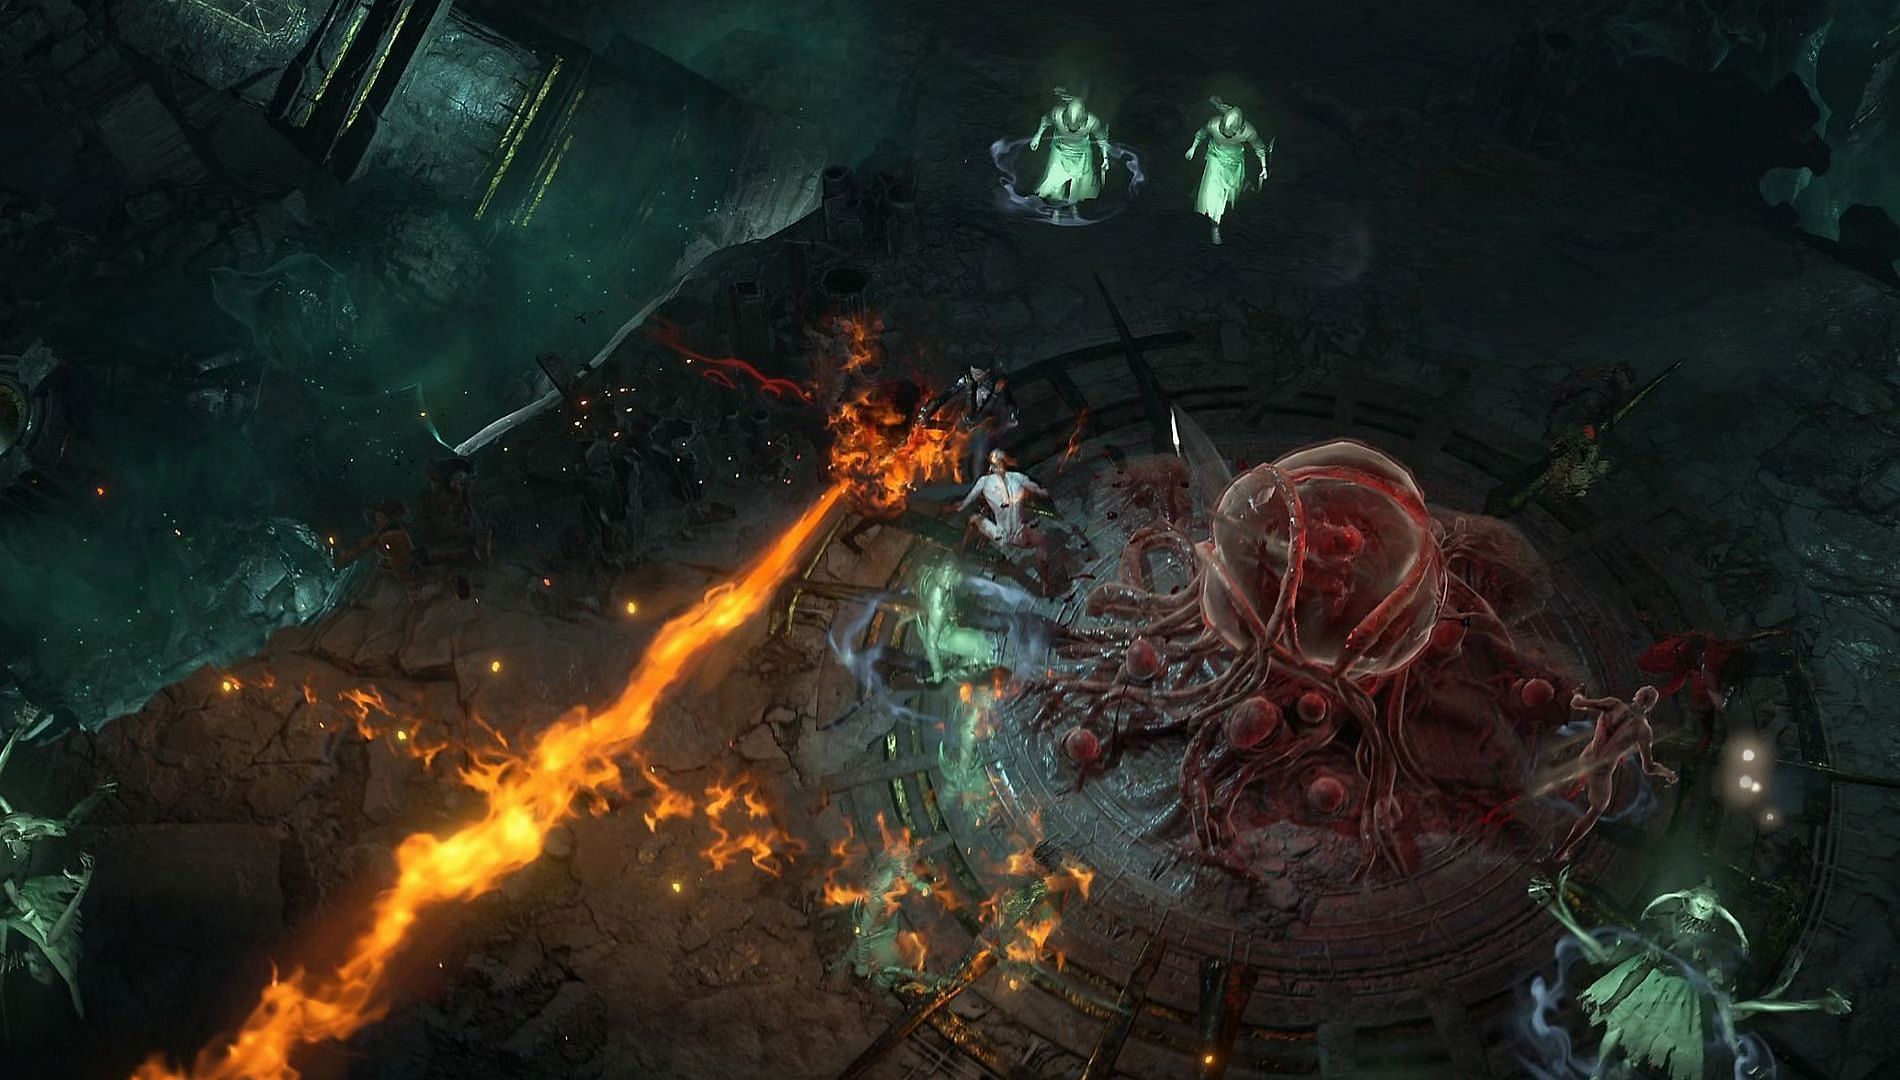 A character using fire against enemies within a dungeon in Diablo 4.